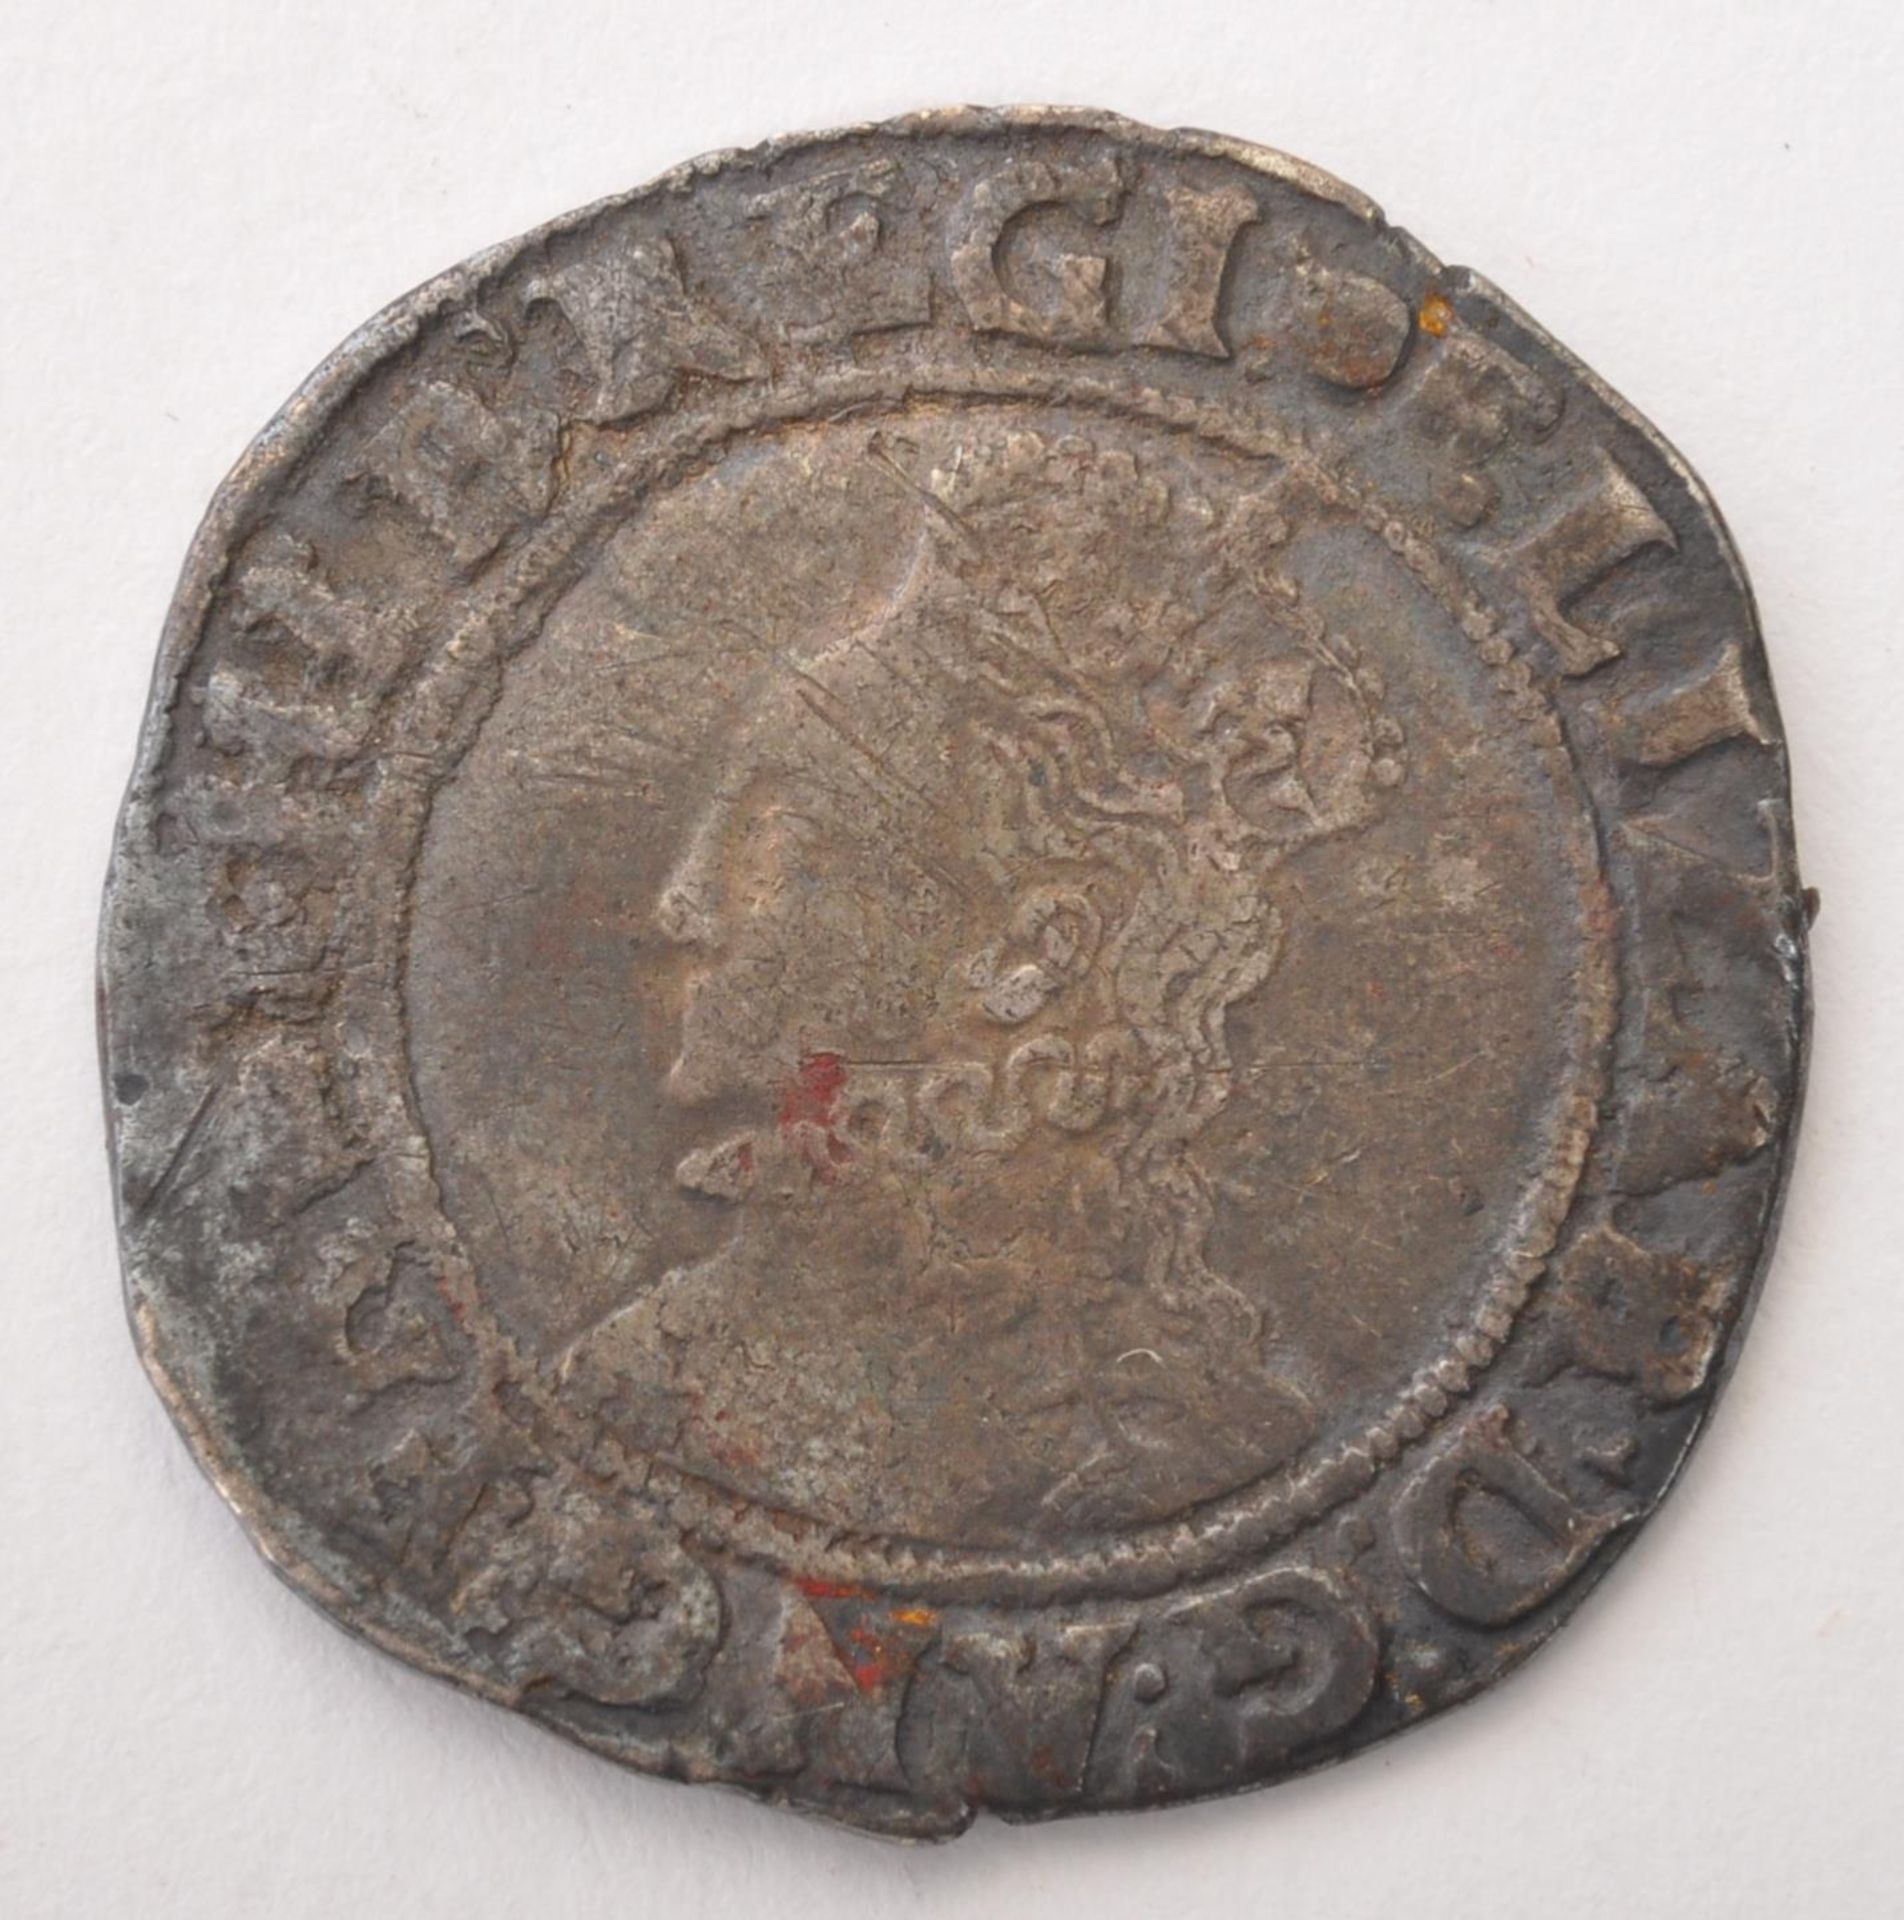 16TH CENTURY ELIZABETH I SILVER SHILLING COIN - Image 2 of 2